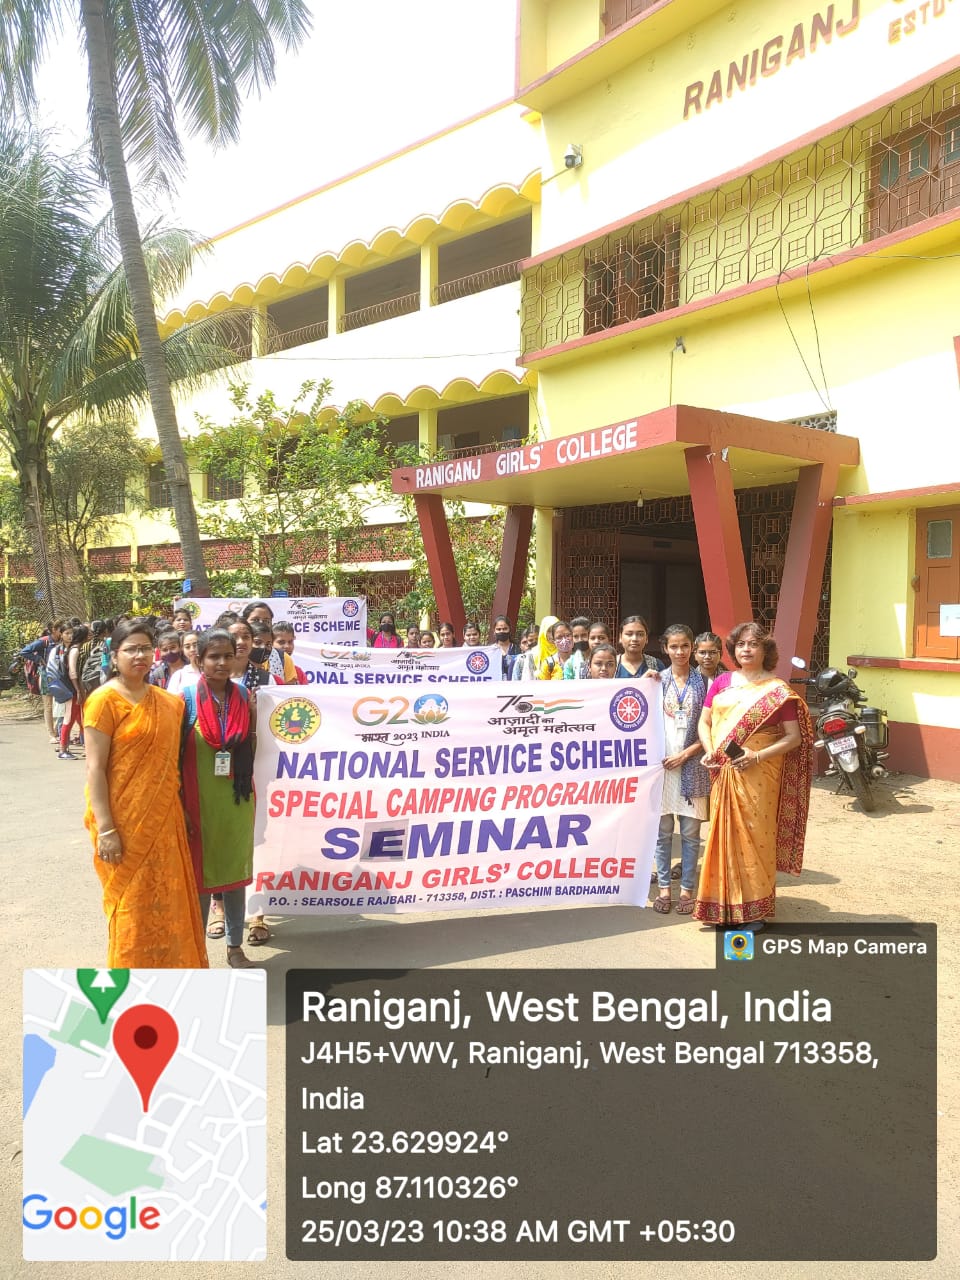 SPECIAL CAMPING PROGRAM OF NSS UNIT I & UNIT II OF RANIGANJ GIRLS' COLLEGE FROM 25-03-23 TO 31-03-23